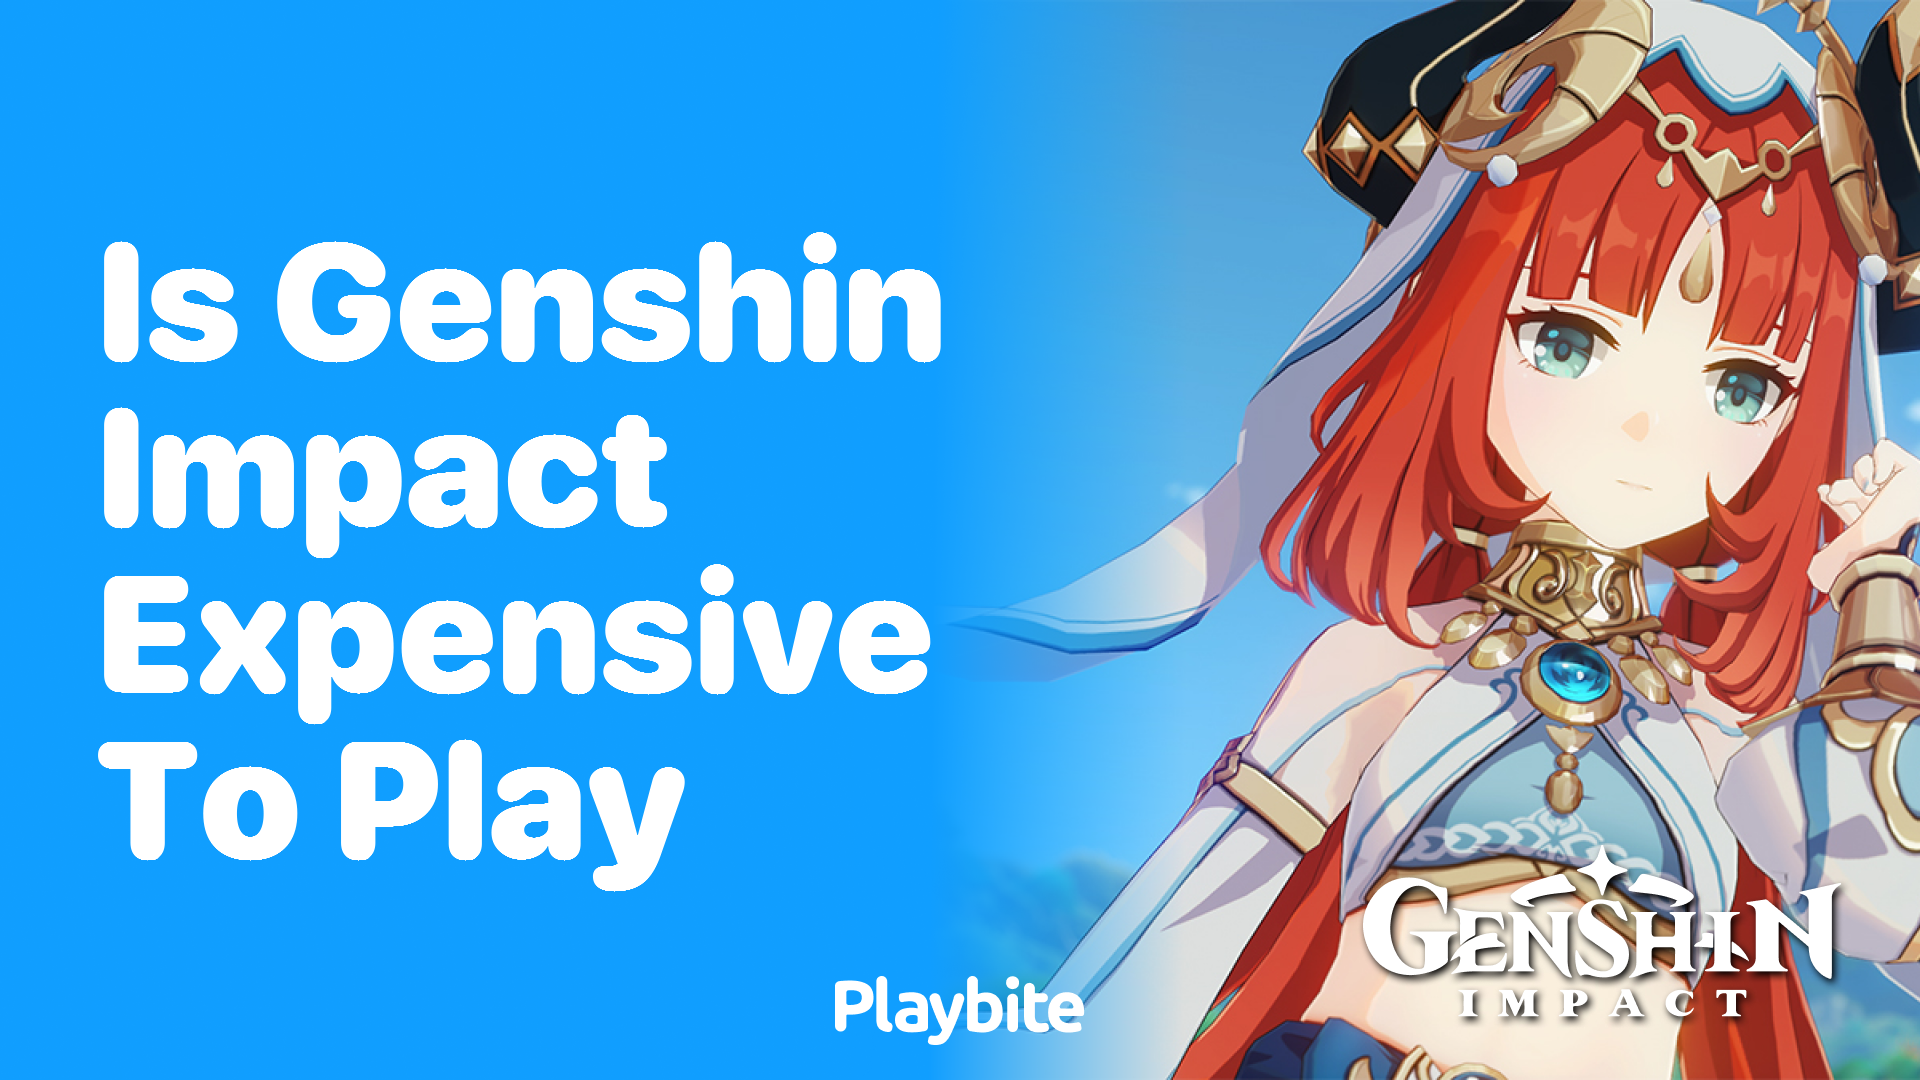 Is Genshin Impact Expensive to Play? Find Out Here!